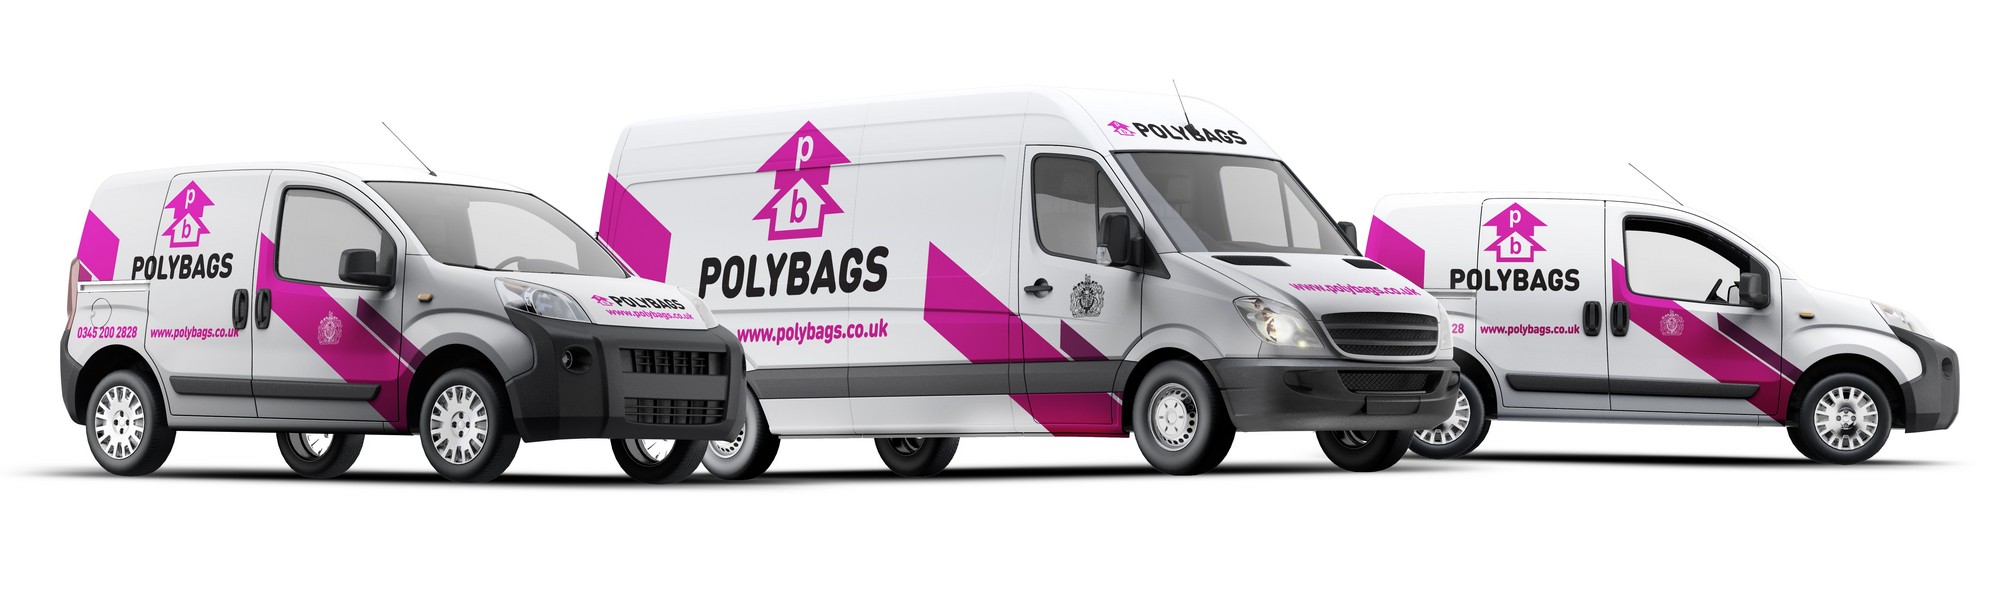 Polybags' delivey vans